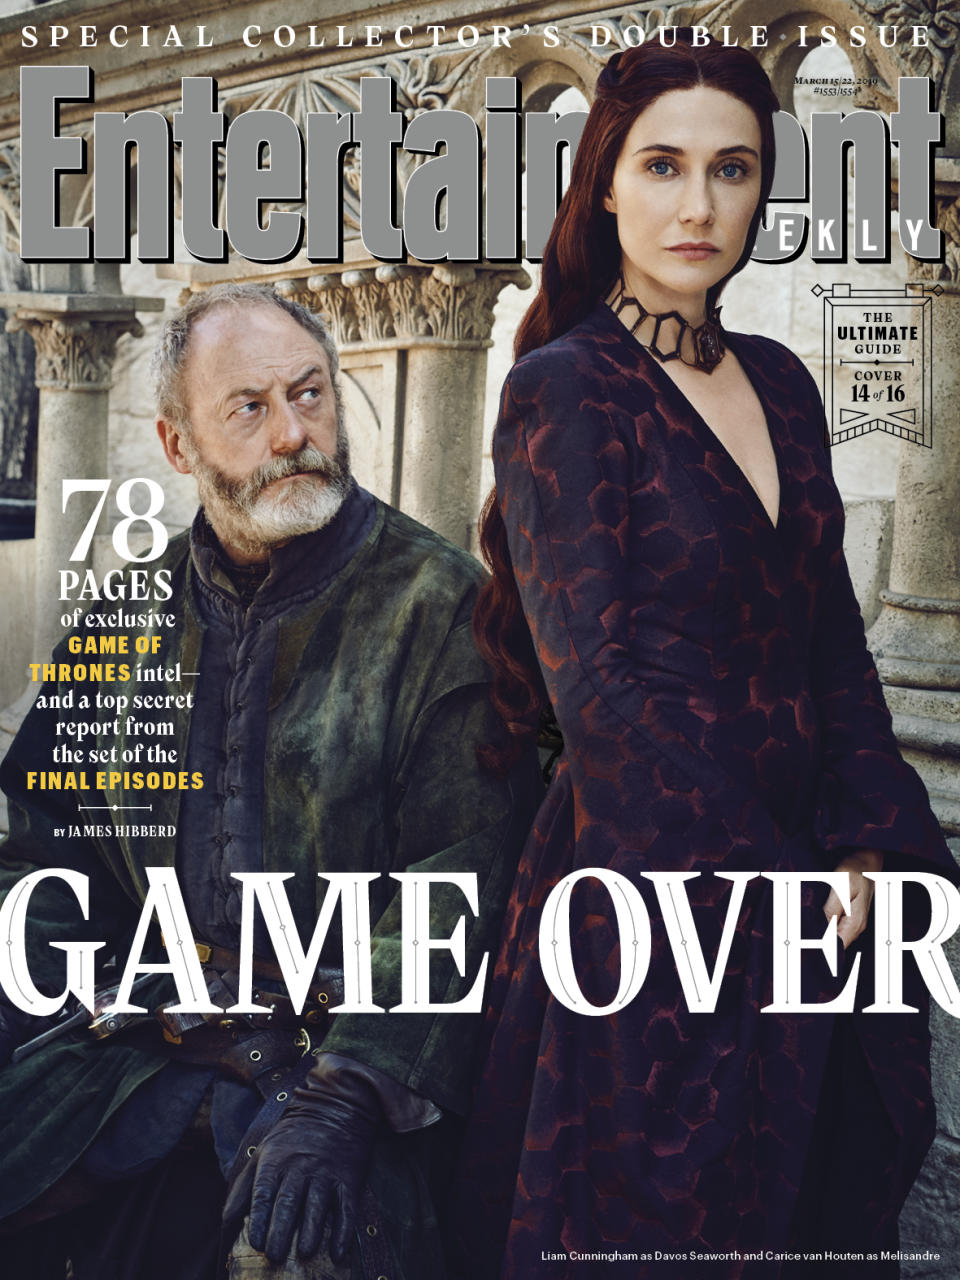 Davos and Melisandre (Photo: Marc Hom for EW)